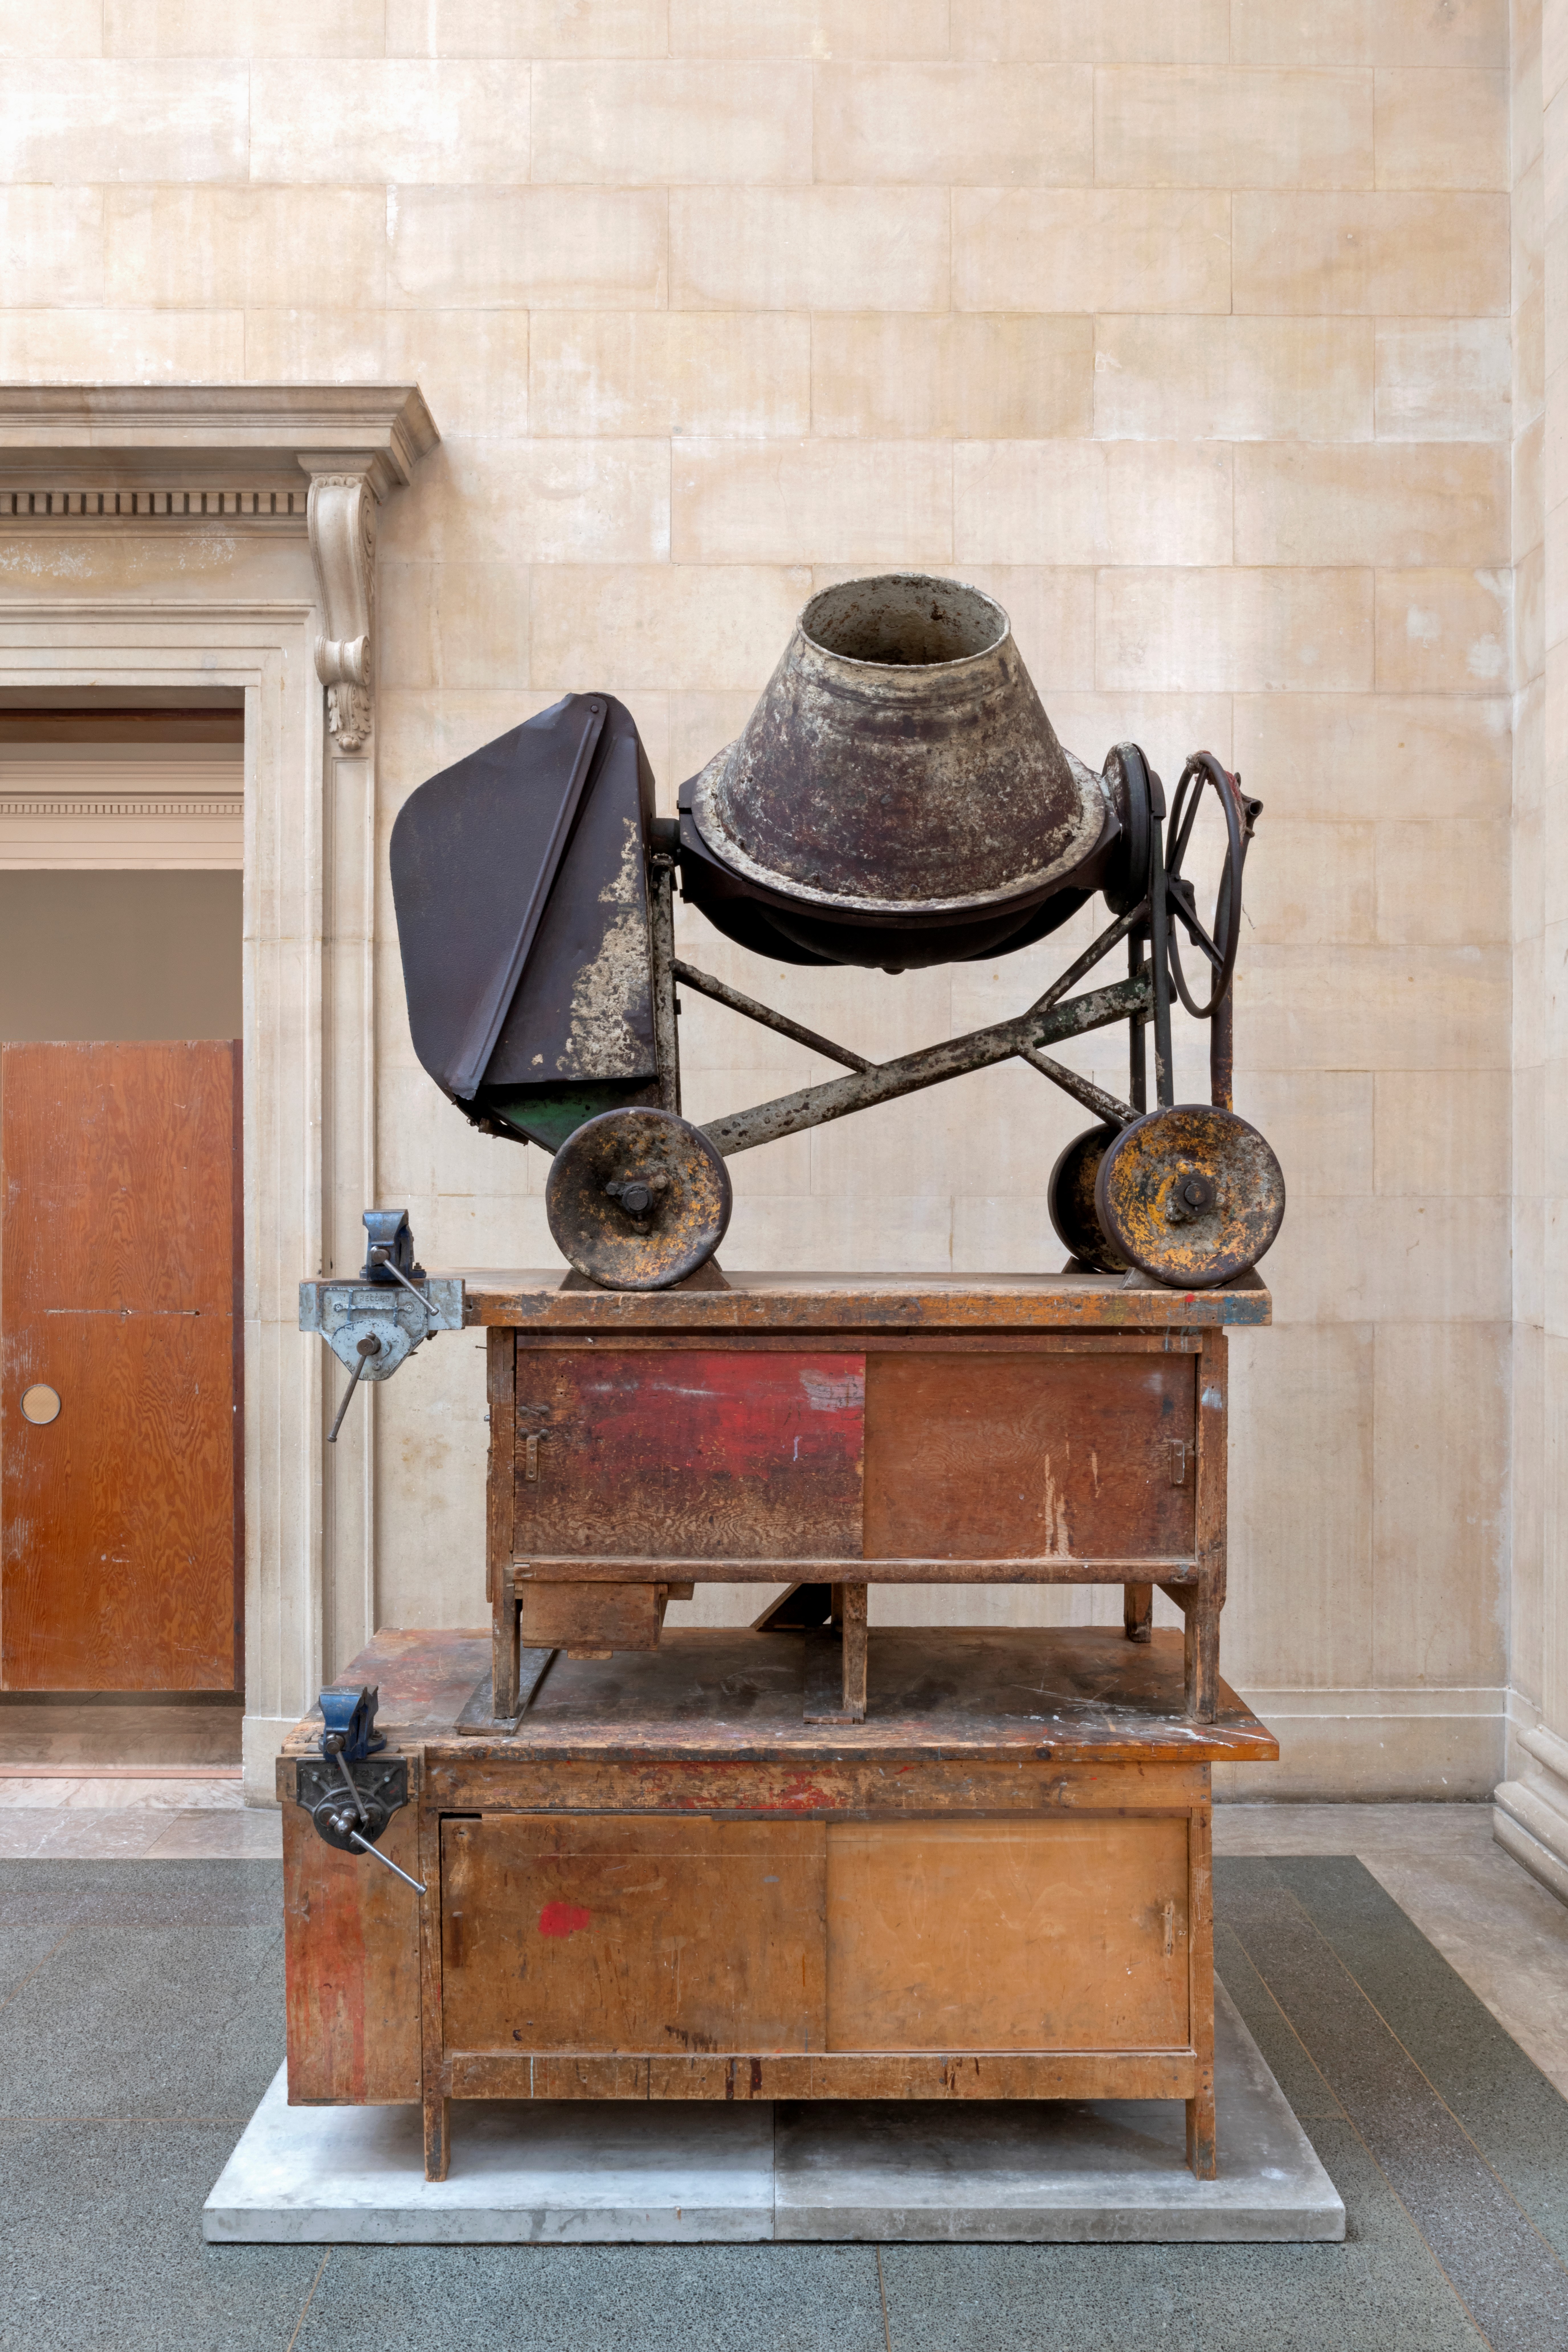 The Asset Strippers at Tate Britain 